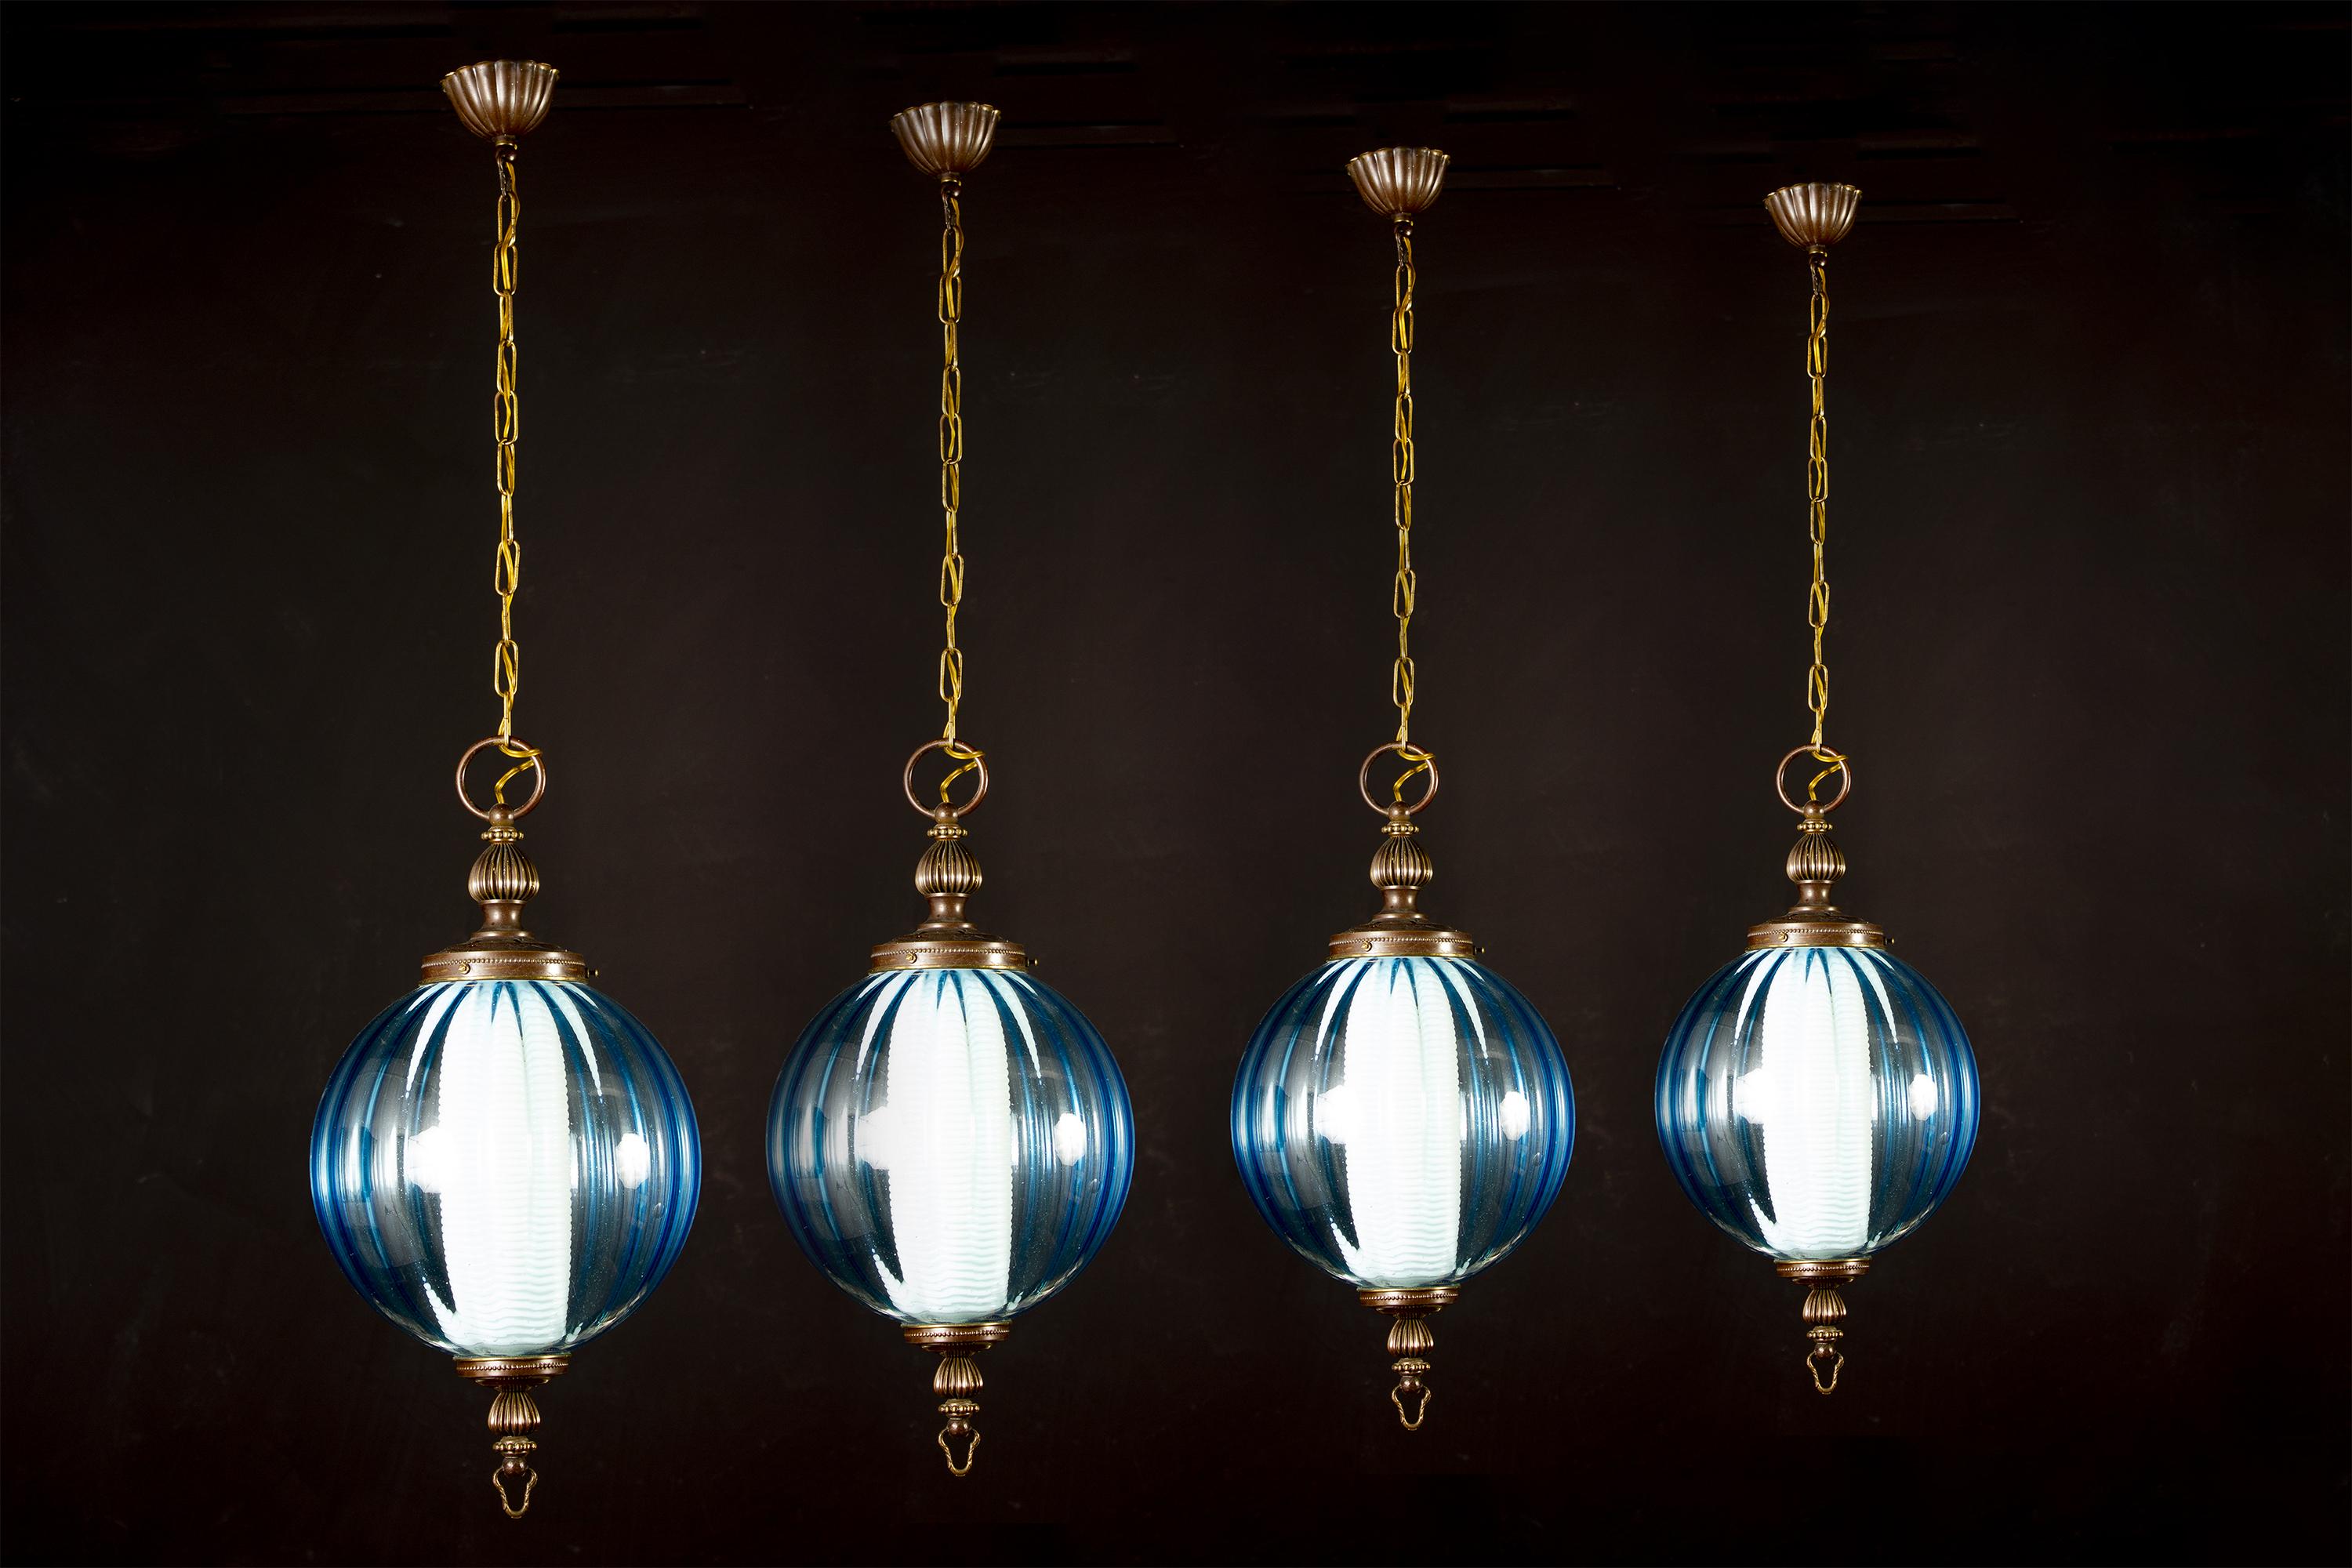 A rare set of four midcentury aquamarine color Murano glass atmosphere lights or lanterns.
Inside each with a E 27 light bulb covered by a refined ribbed opaline glass, creating a fabulous light effect.
Attributed to Luigi Caccia Dominioni.
Each